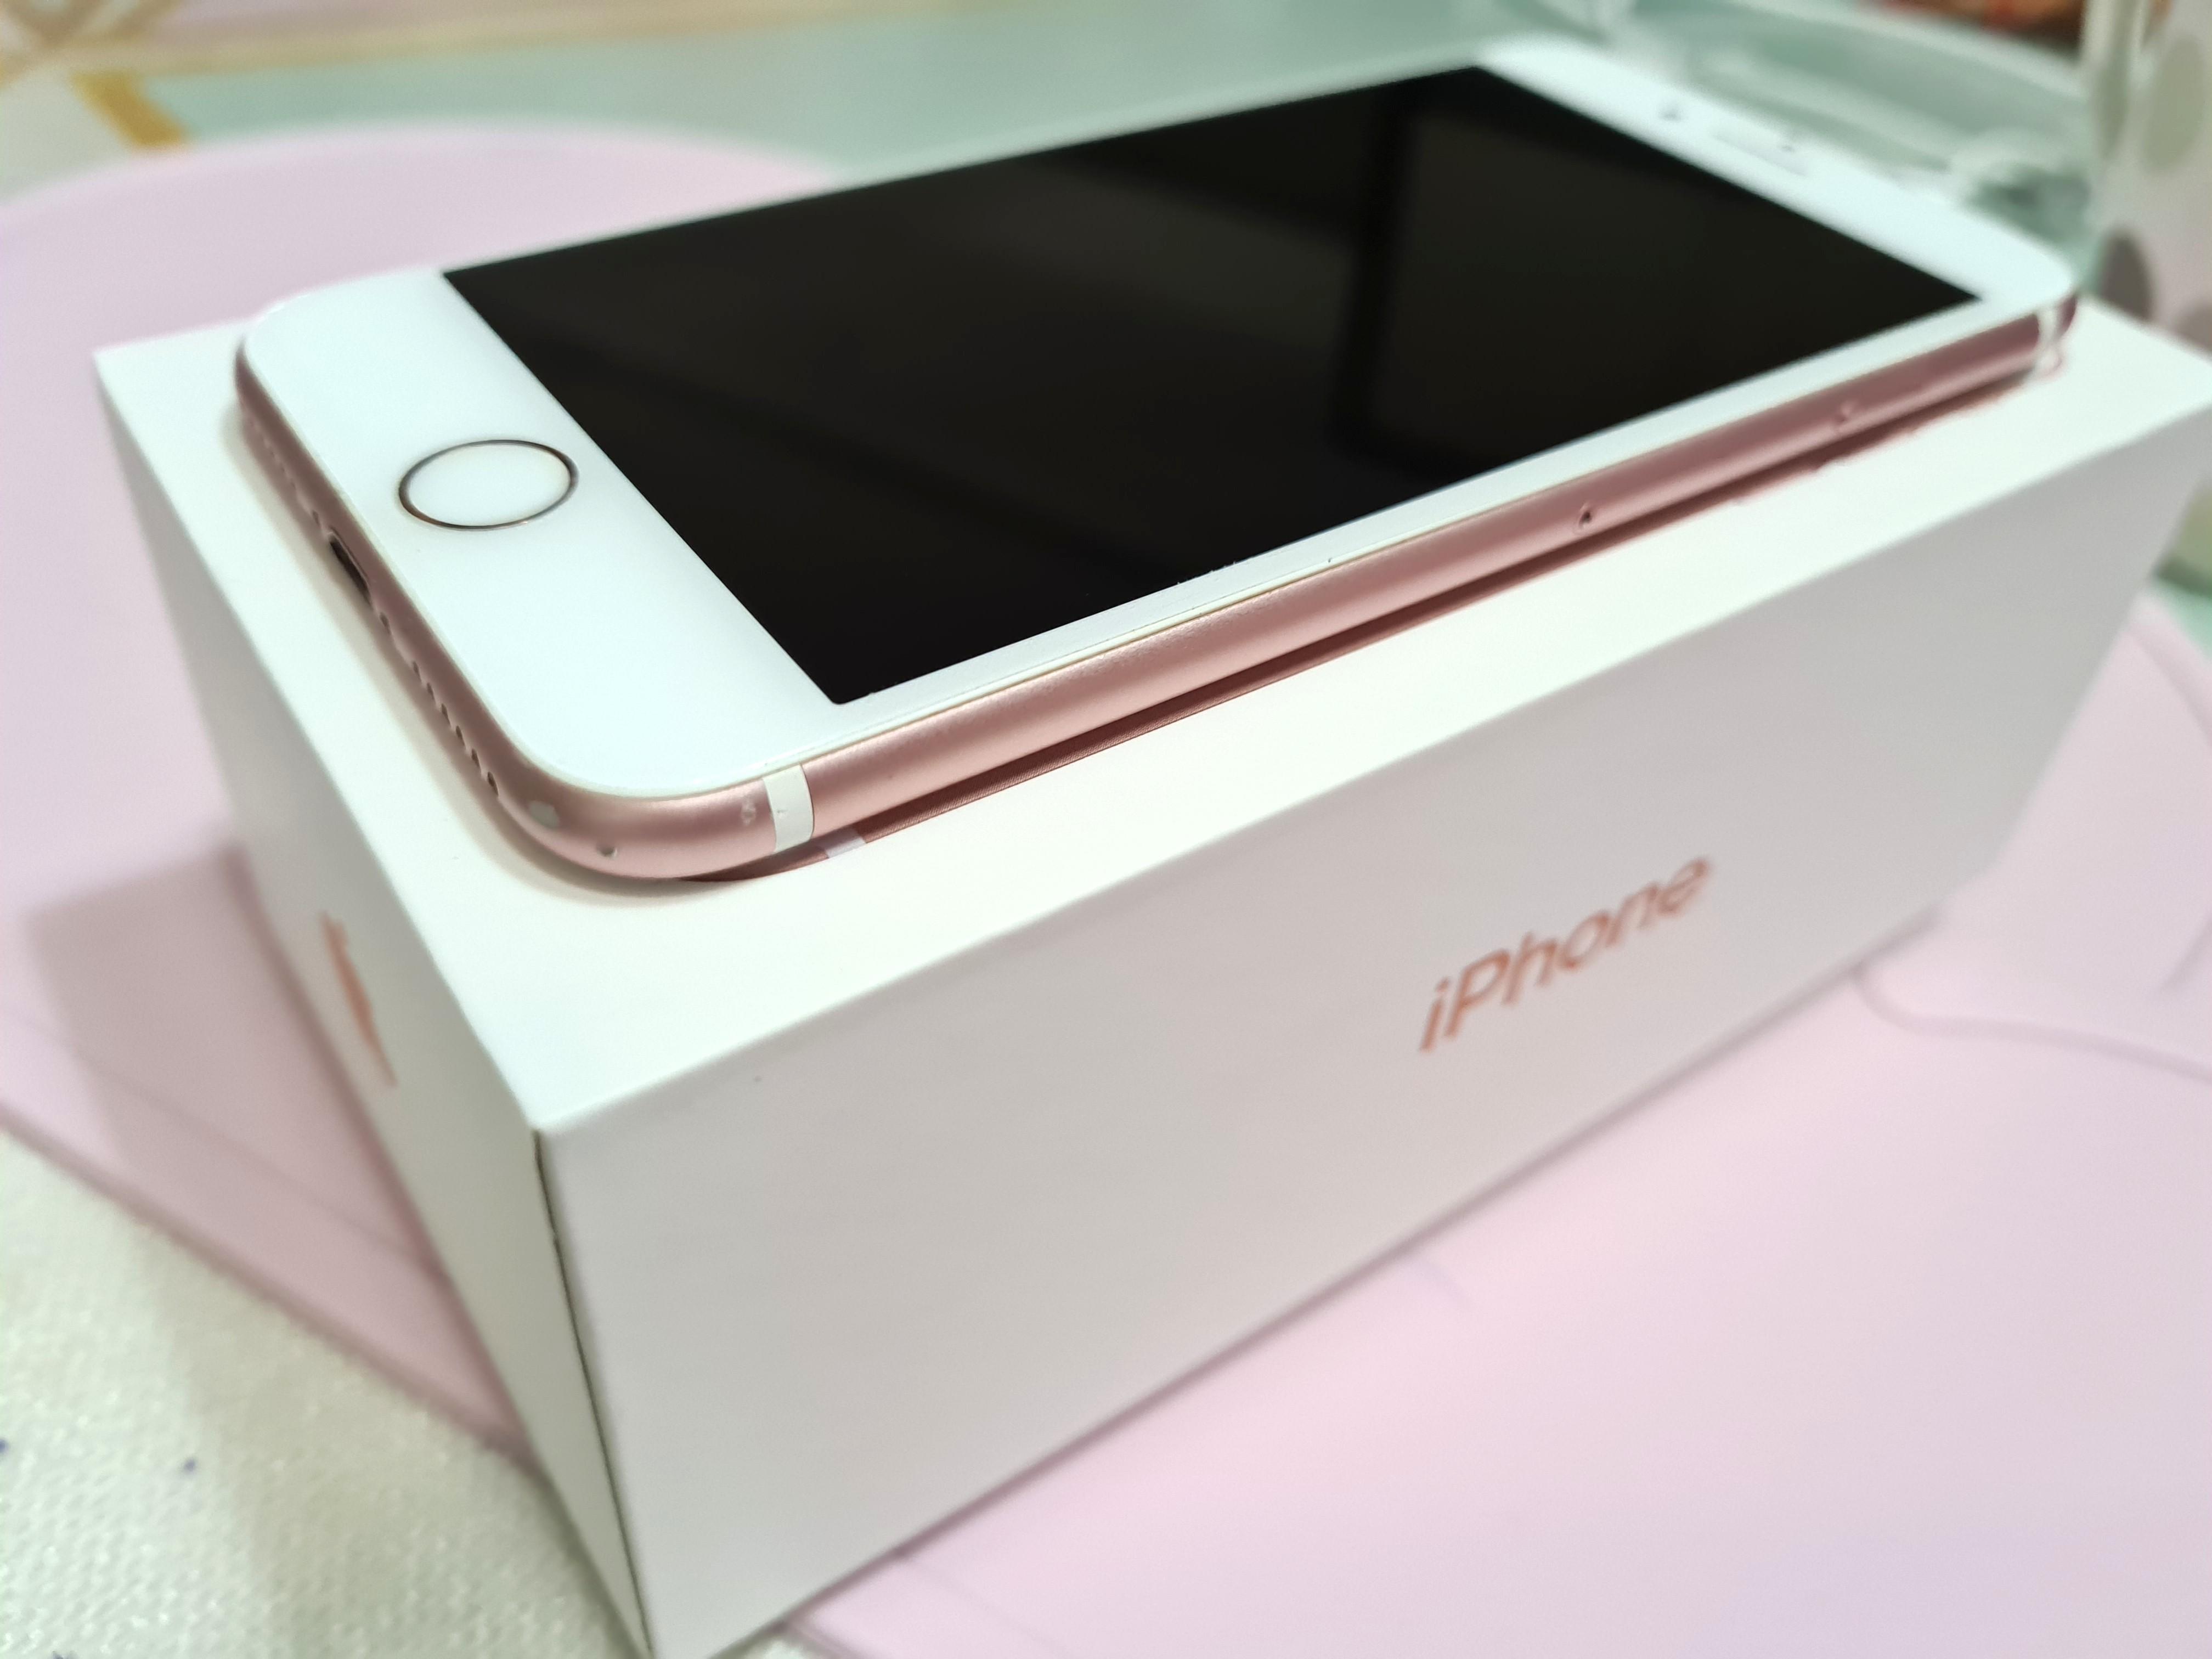 Apple Iphone 7 128gb Rose Gold Mobile Phones Tablets Iphone Iphone 7 Series On Carousell